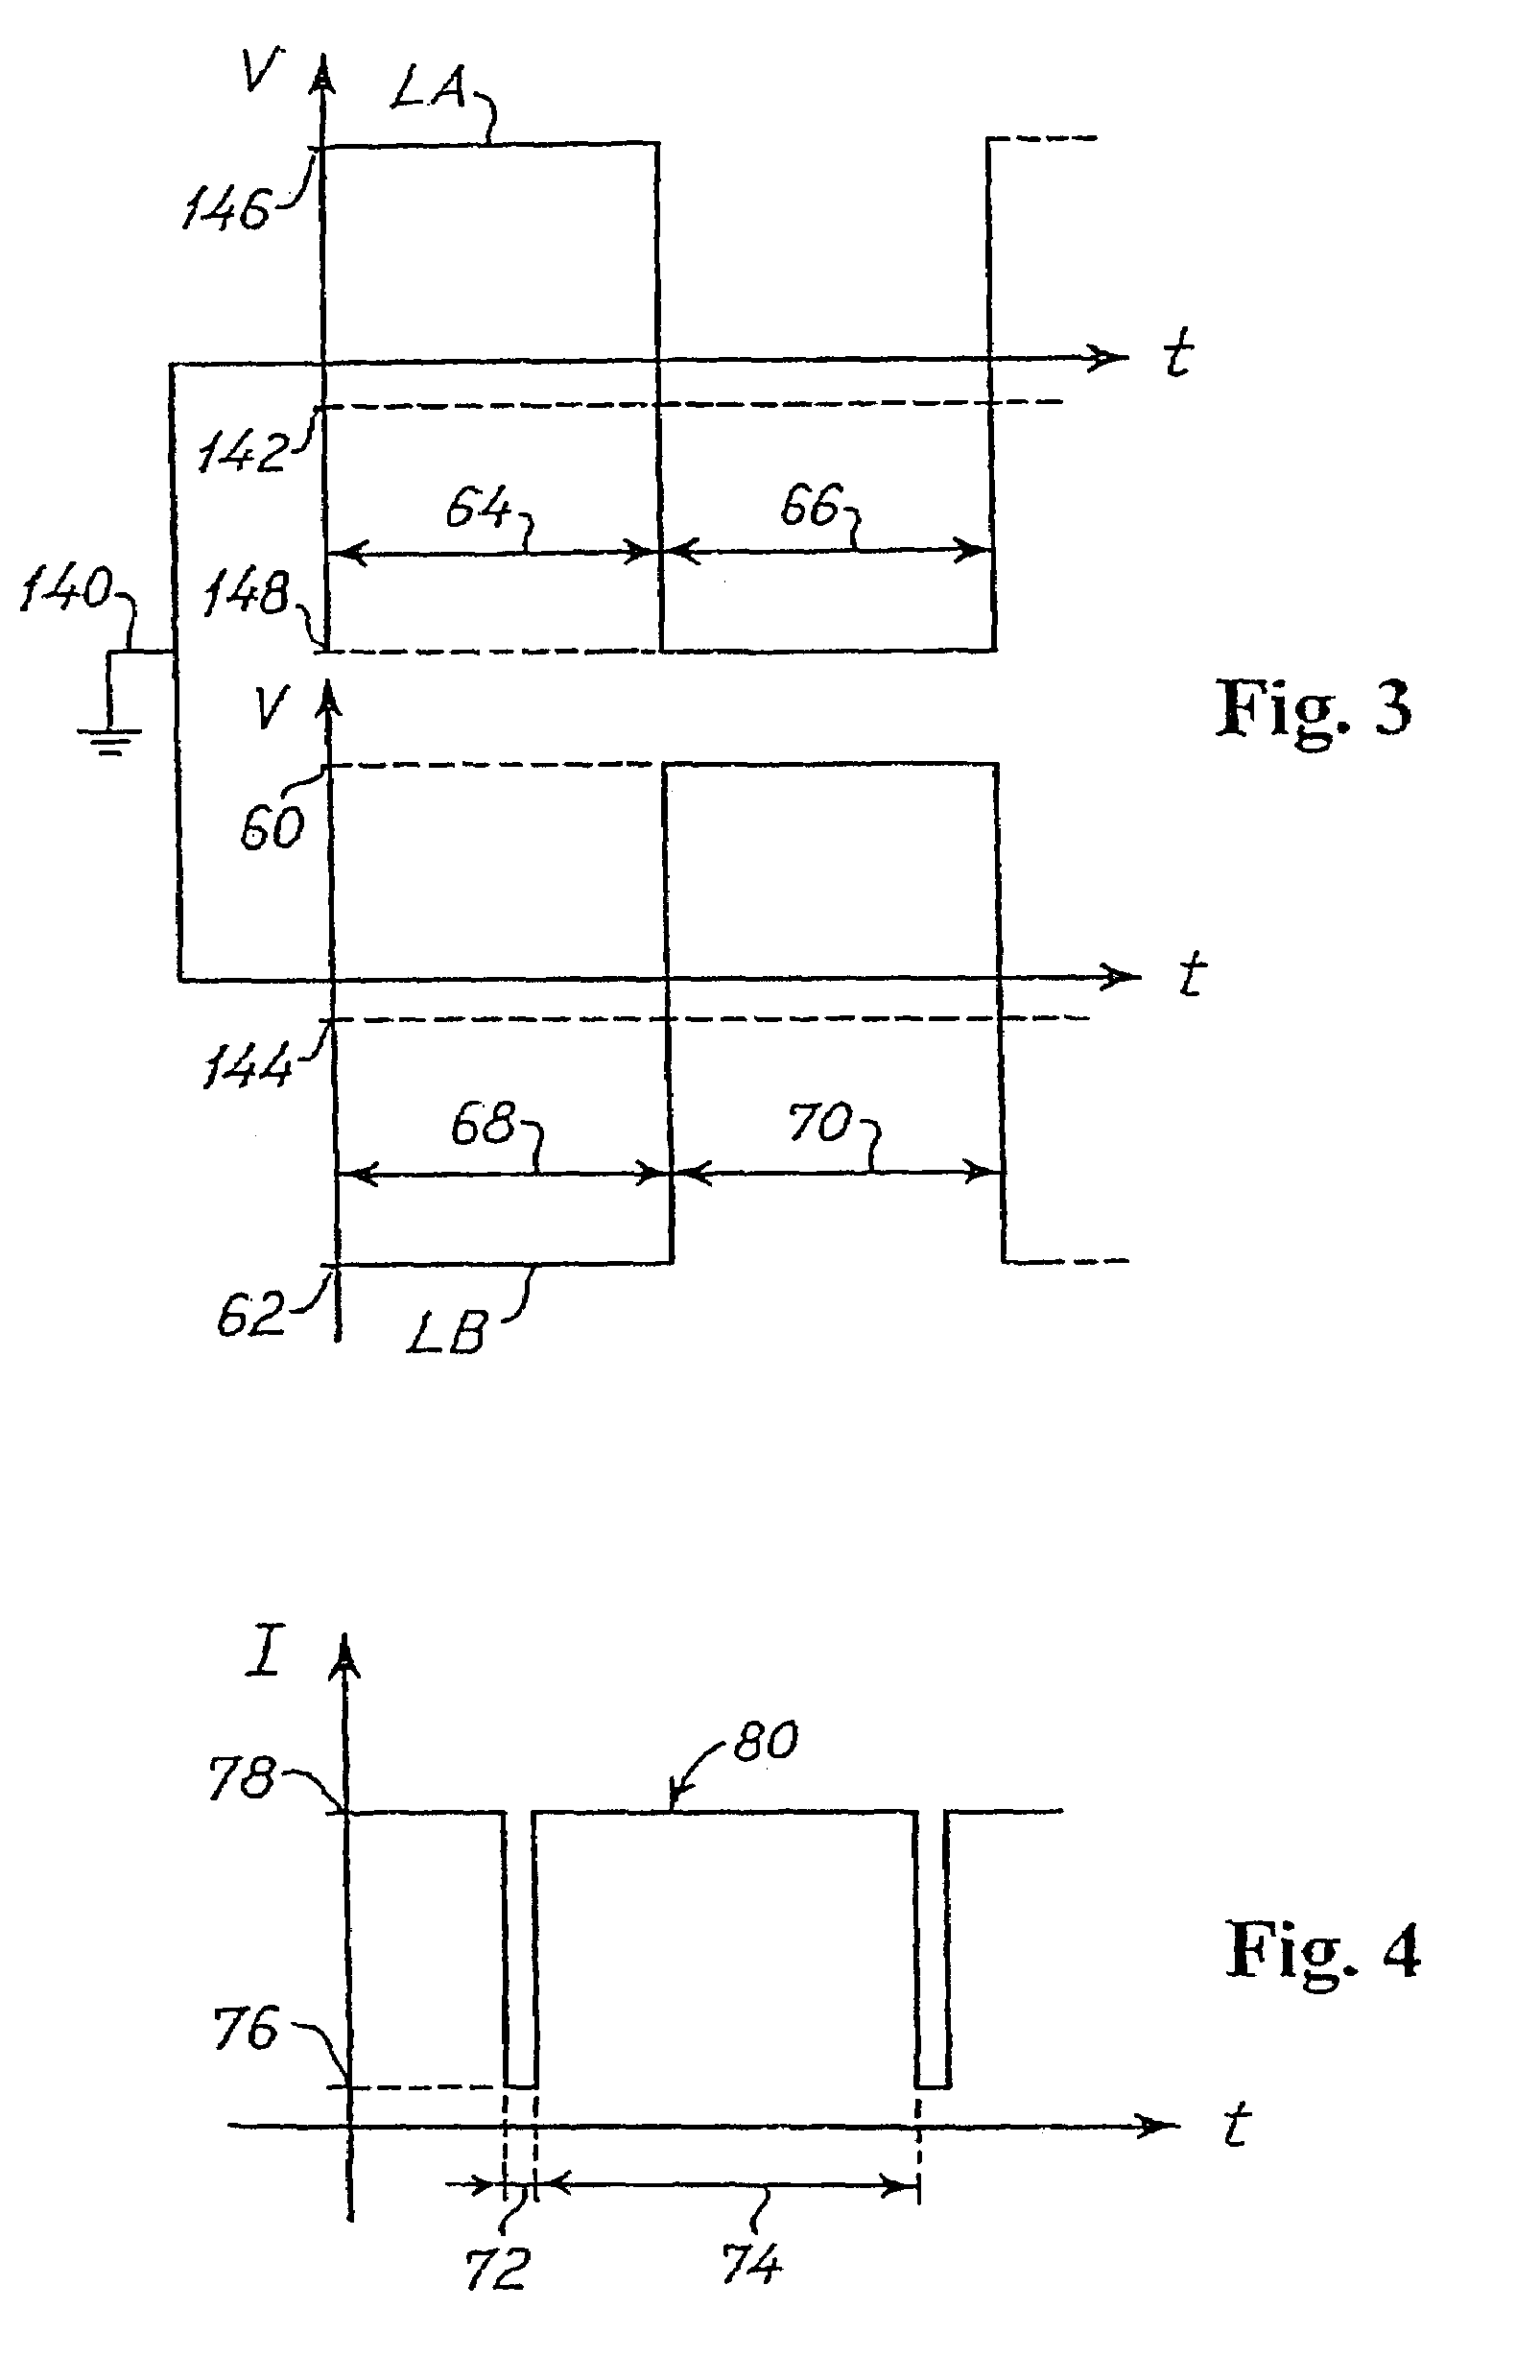 Two-wire controlling and monitoring system for the irrigation of localized areas of soil